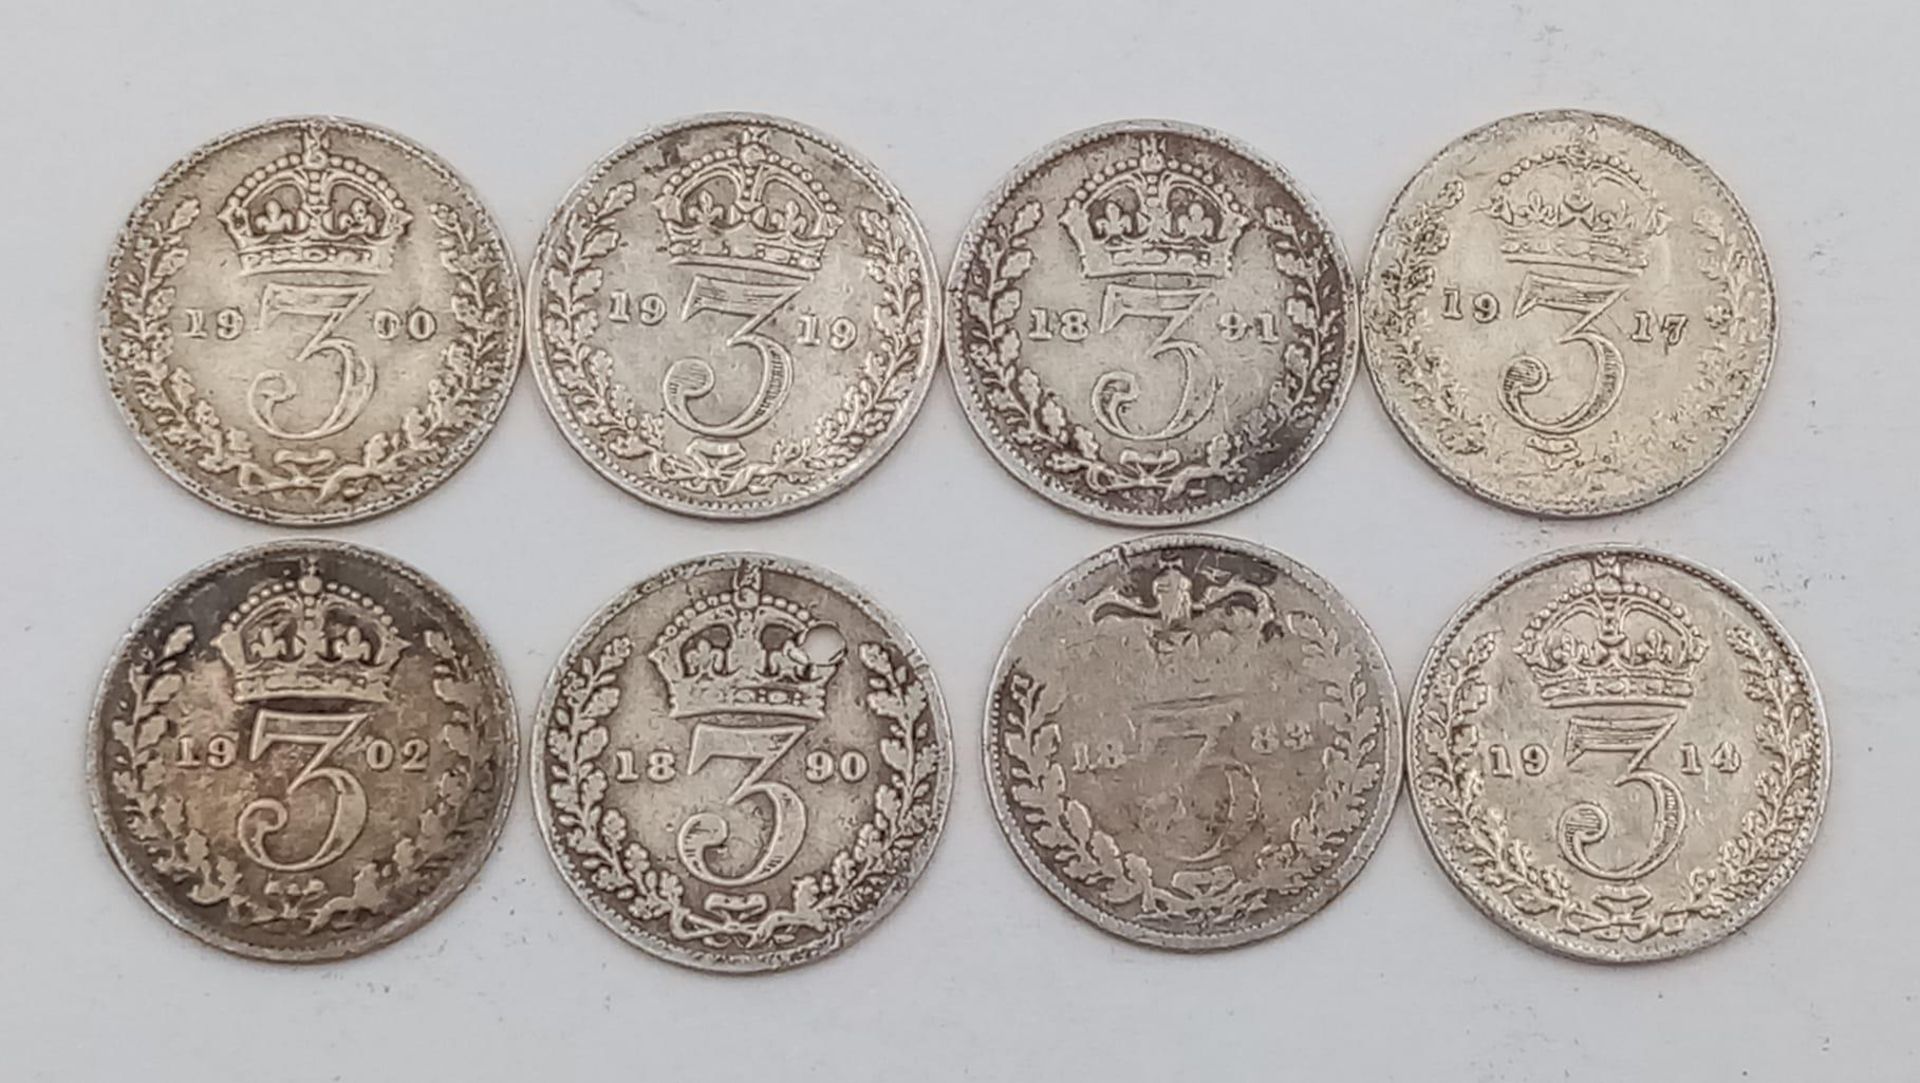 A Collection of 23 British Pre 1920 Silver Threepence coins. - Image 3 of 4